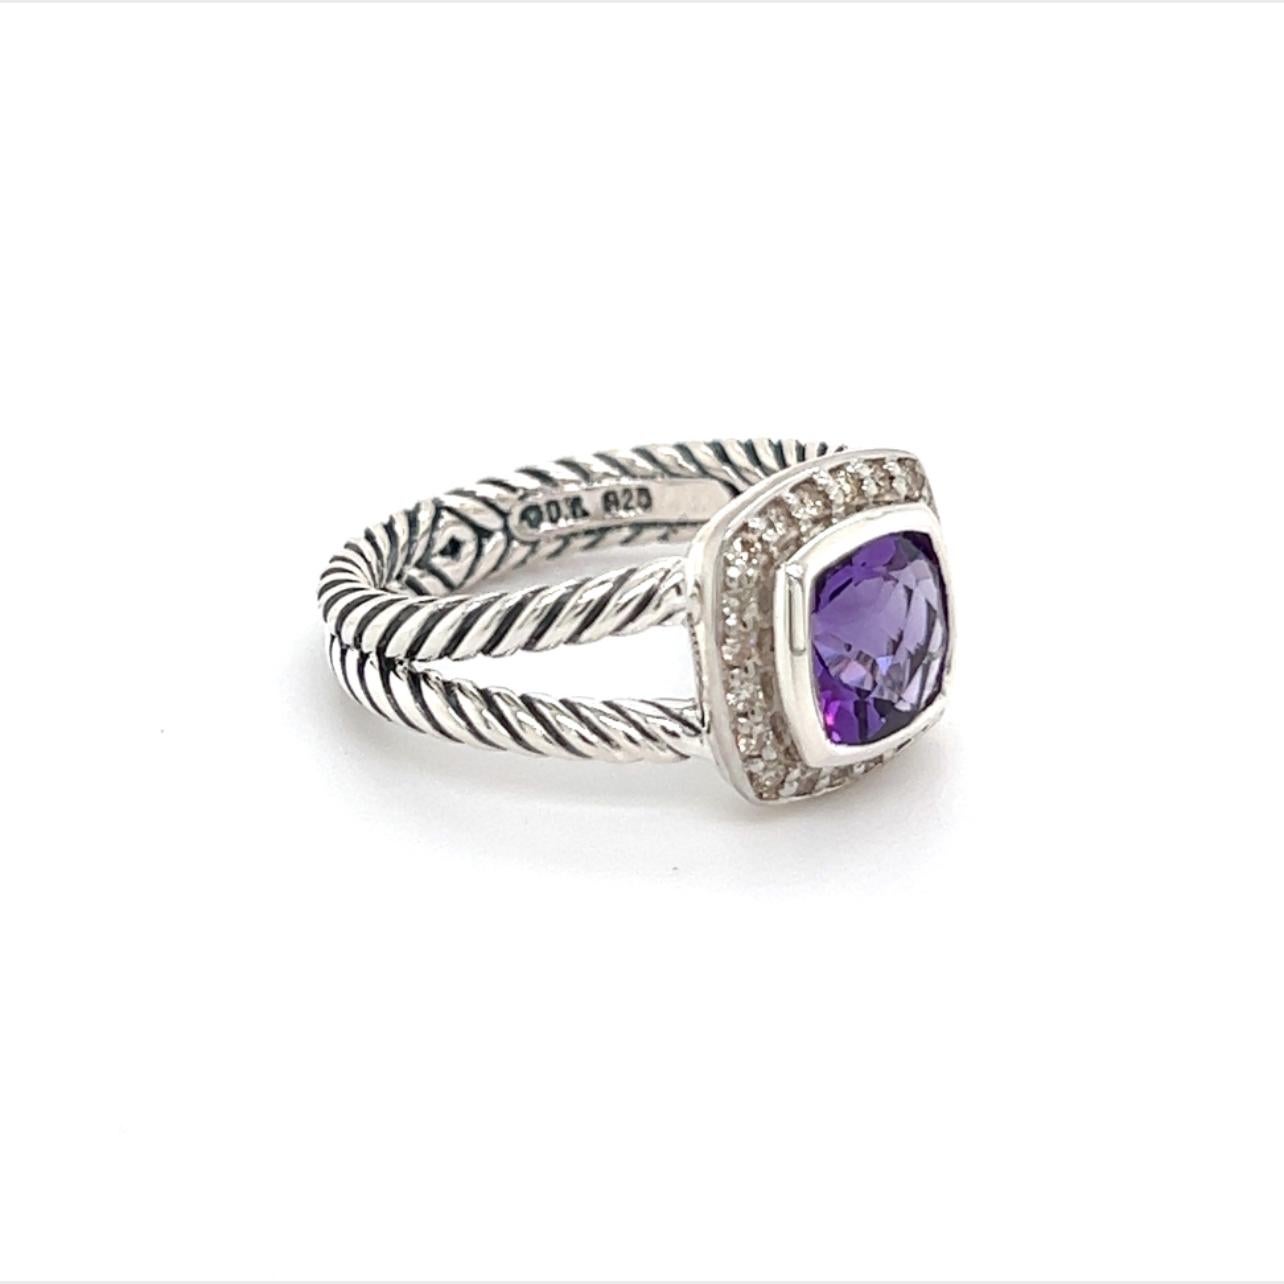 David Yurman Authentic Estate Diamond Petite Albion Amethyst Ring Size 6.5 Sil 1.67 TCW DY191

Retail: $999

Ring from ALBION COLLECTION

This elegant Authentic David Yurman ring is made of sterling silver and has a weight of 5.43 grams.

TRUSTED